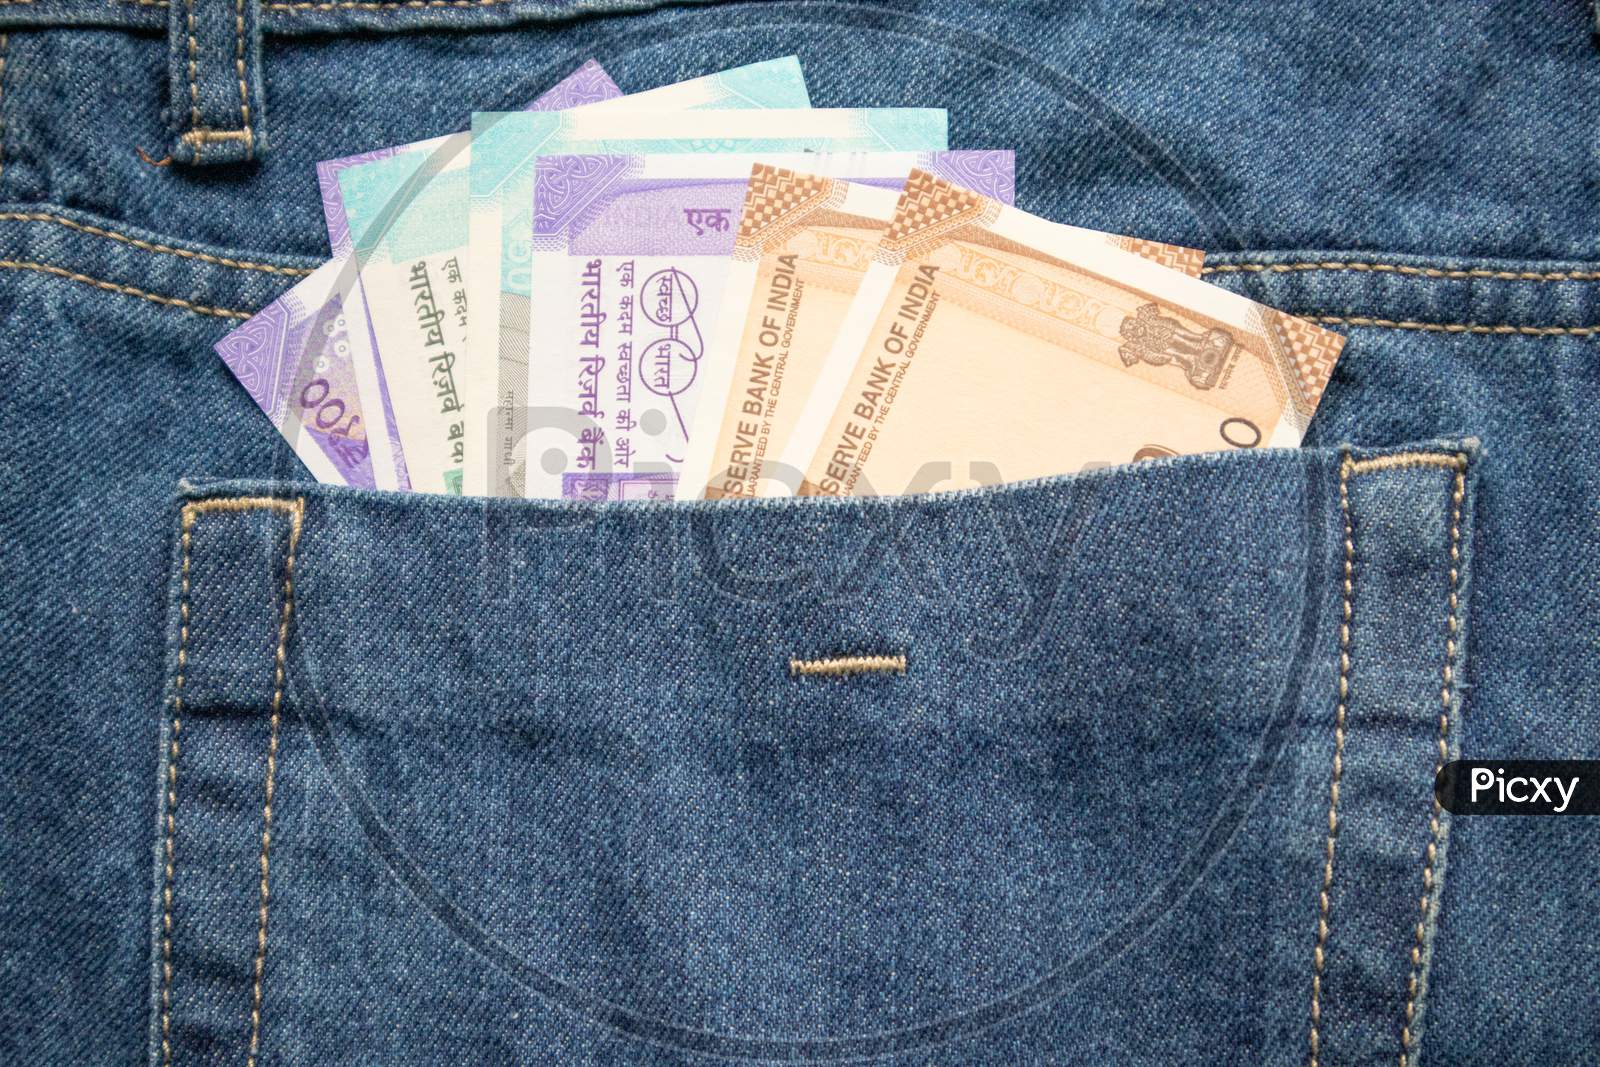 New Series Of All Indian Currencies,Money In Jeans Pocket.